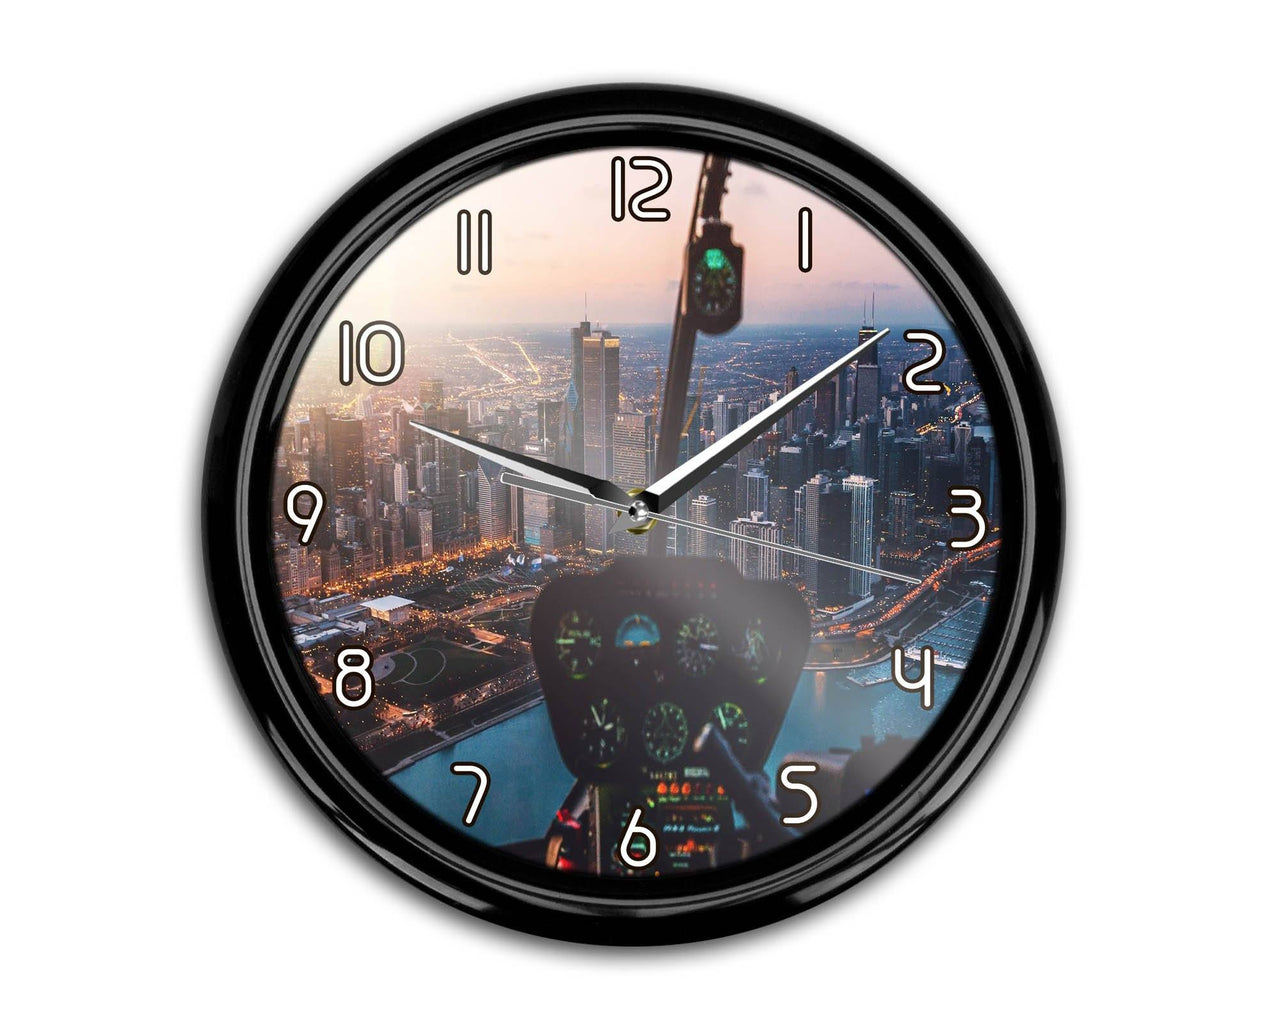 Amazing City View from Helicopter Cockpit Printed Wall Clocks Aviation Shop 